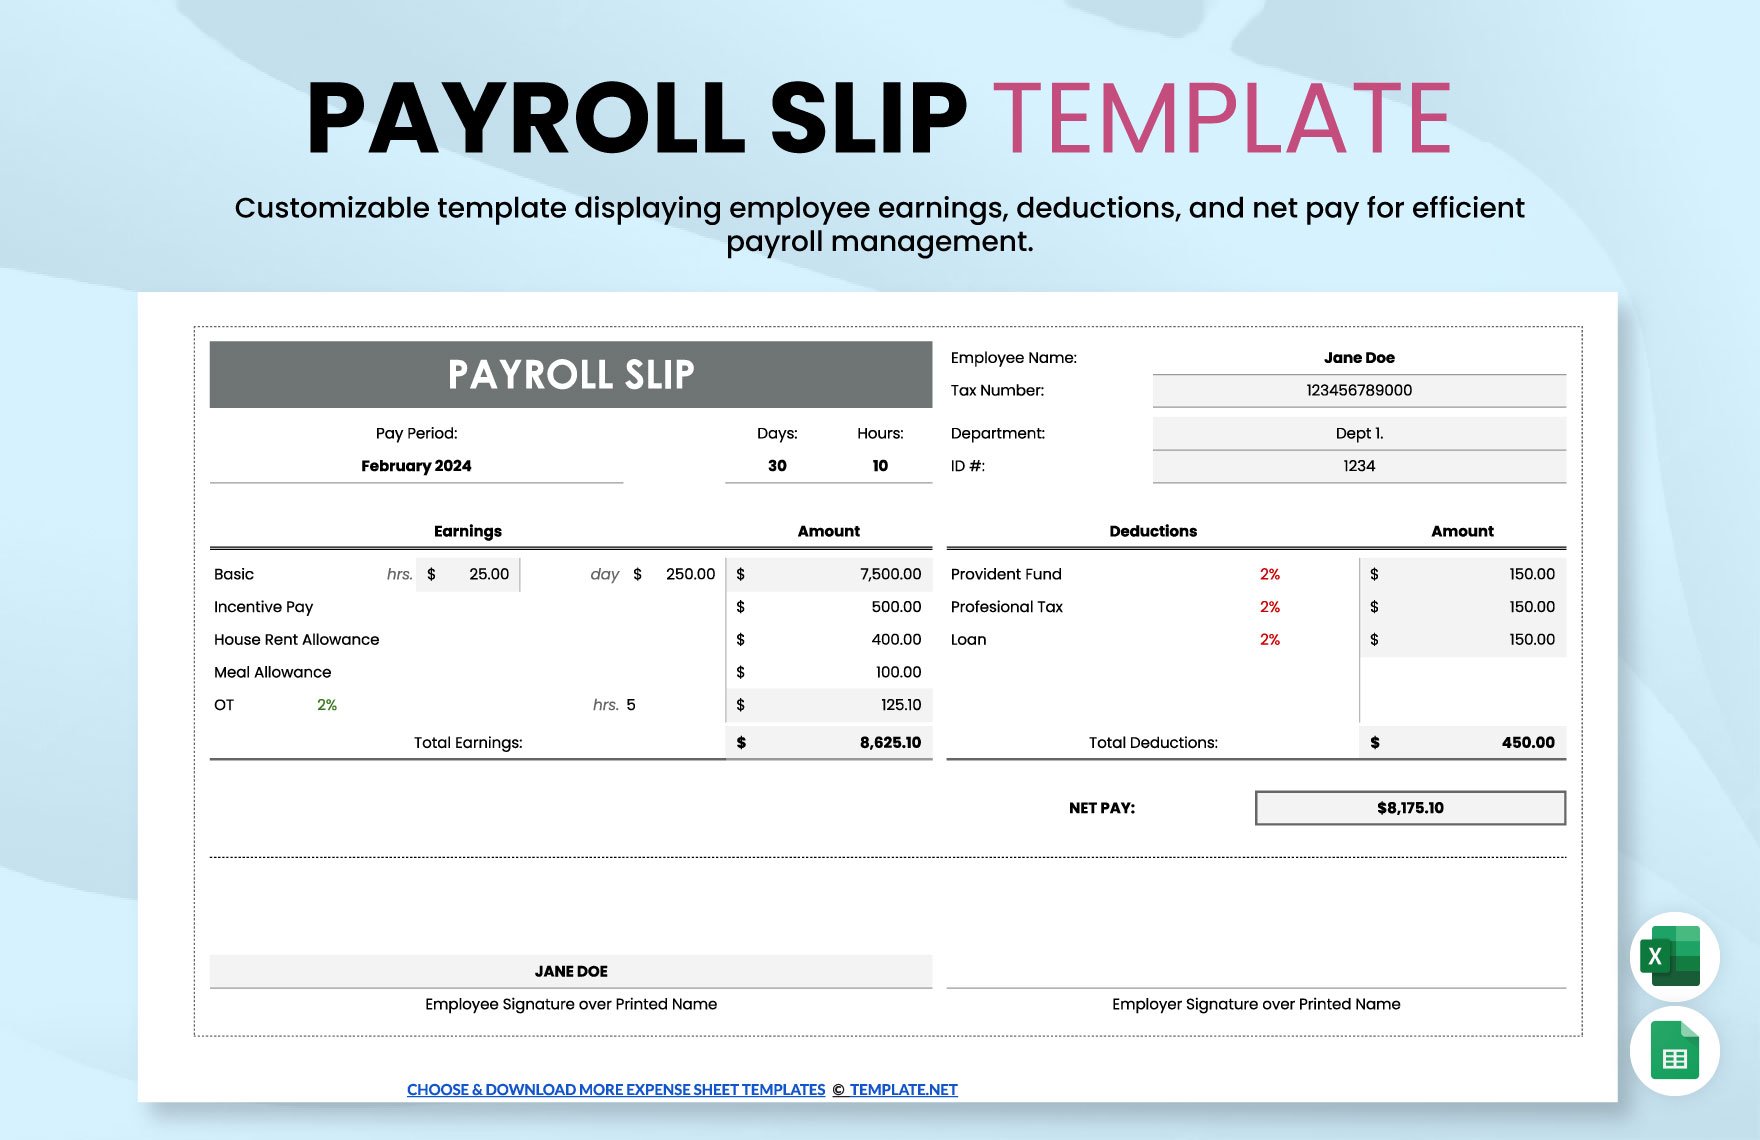 Payroll Slip Template in Excel, Google Sheets